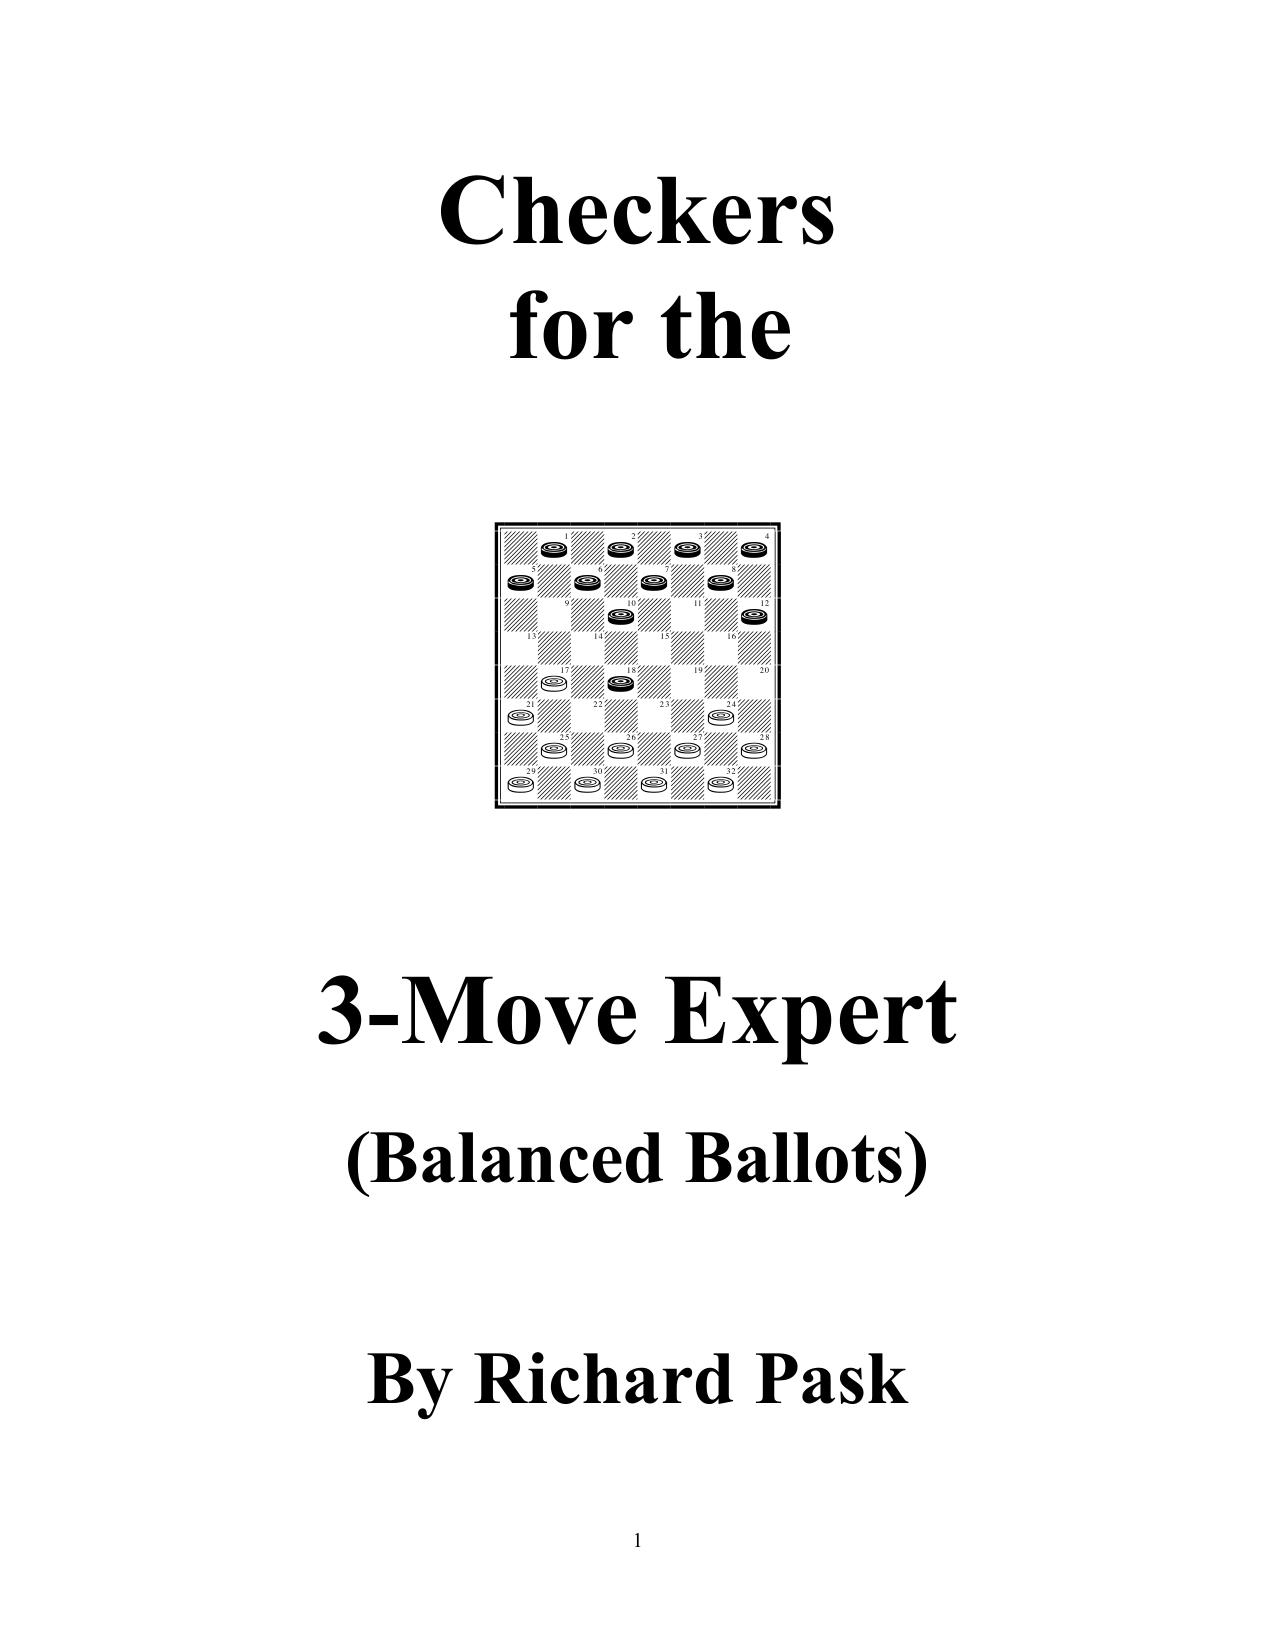 Checkers for the 3-Move Expert (Balanced Ballots) by Richard Pask